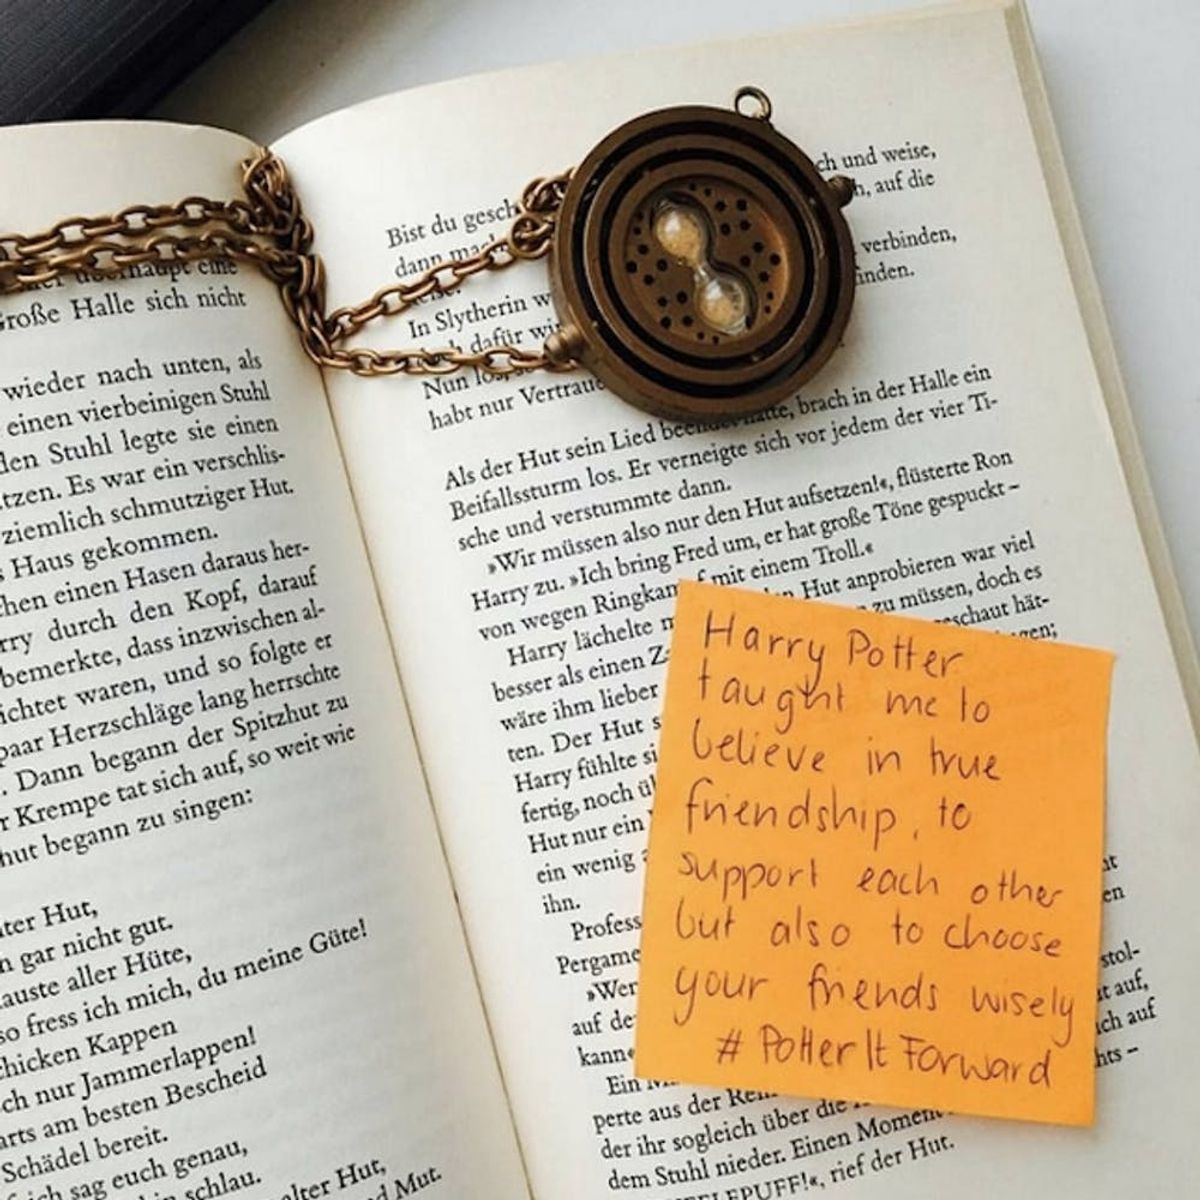 You’ll Love The Way Adult Harry Potter Fans Are Spreading Love of the Series